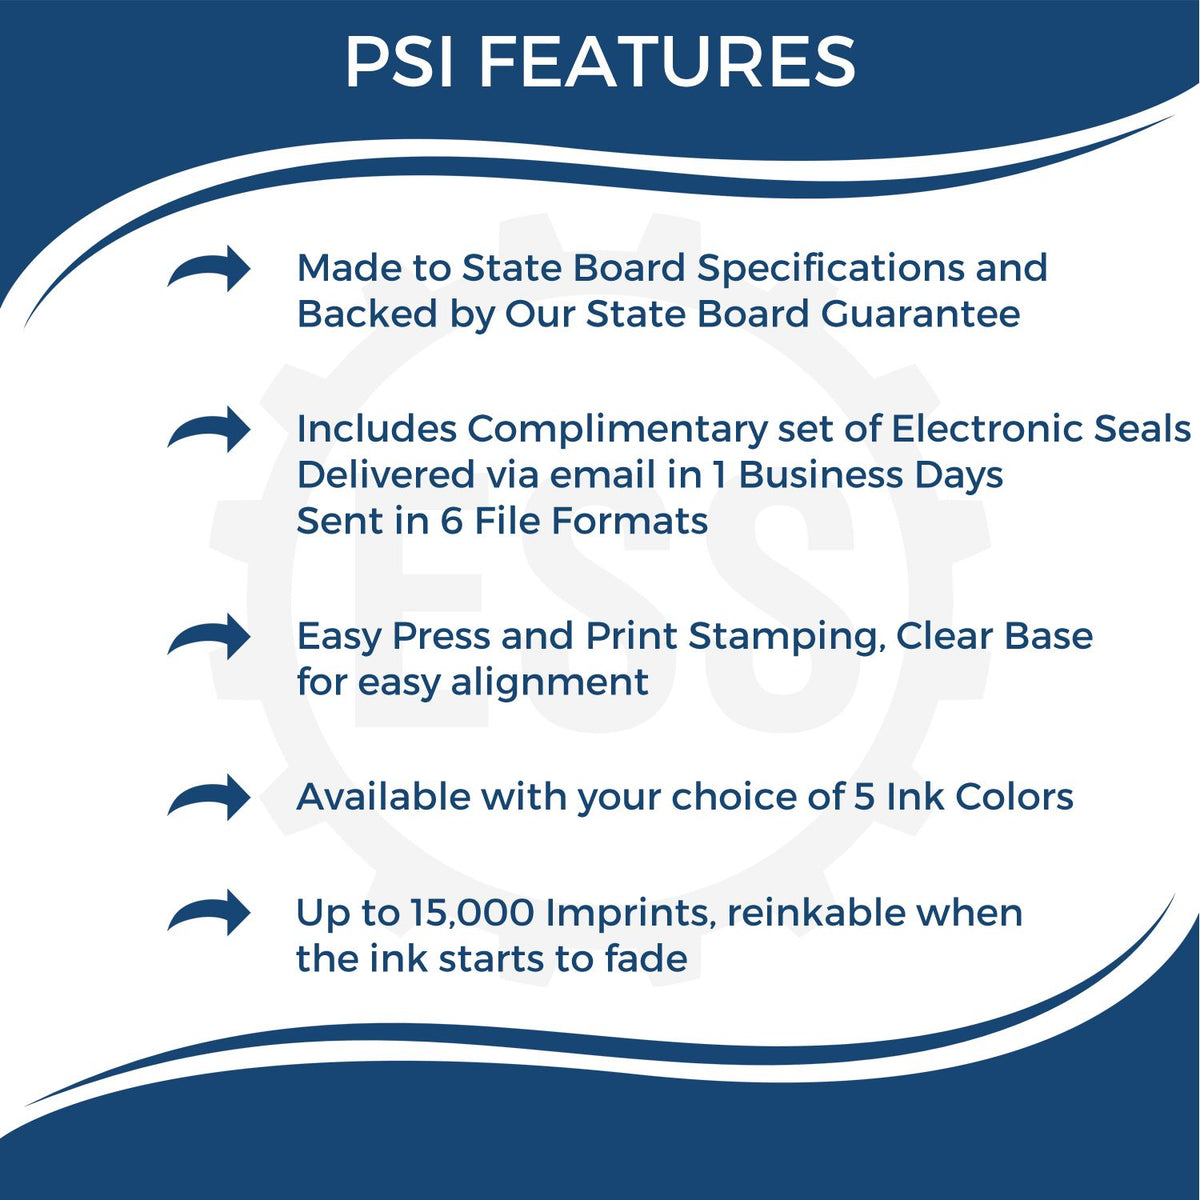 A picture of an infographic highlighting the selling points for the PSI Alaska Notary Stamp